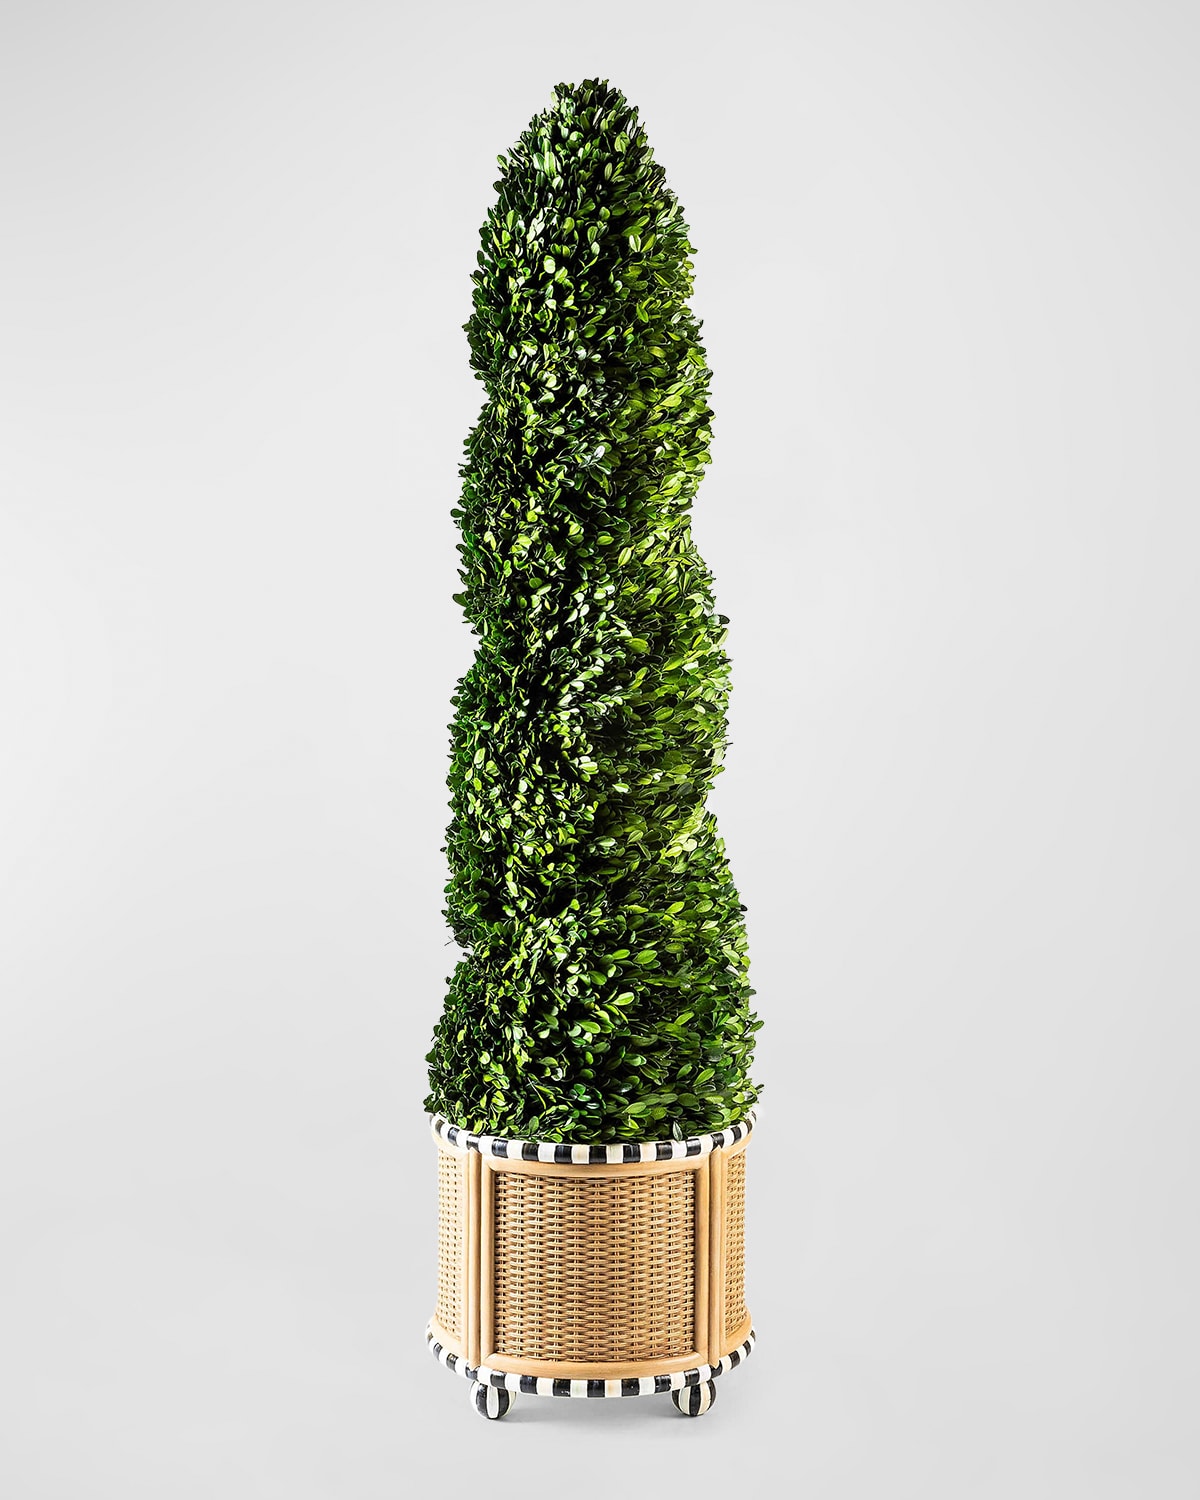 Mackenzie-childs Large Preserved Spiral Boxwood Topiary In Basketweave Base - 55" In Green